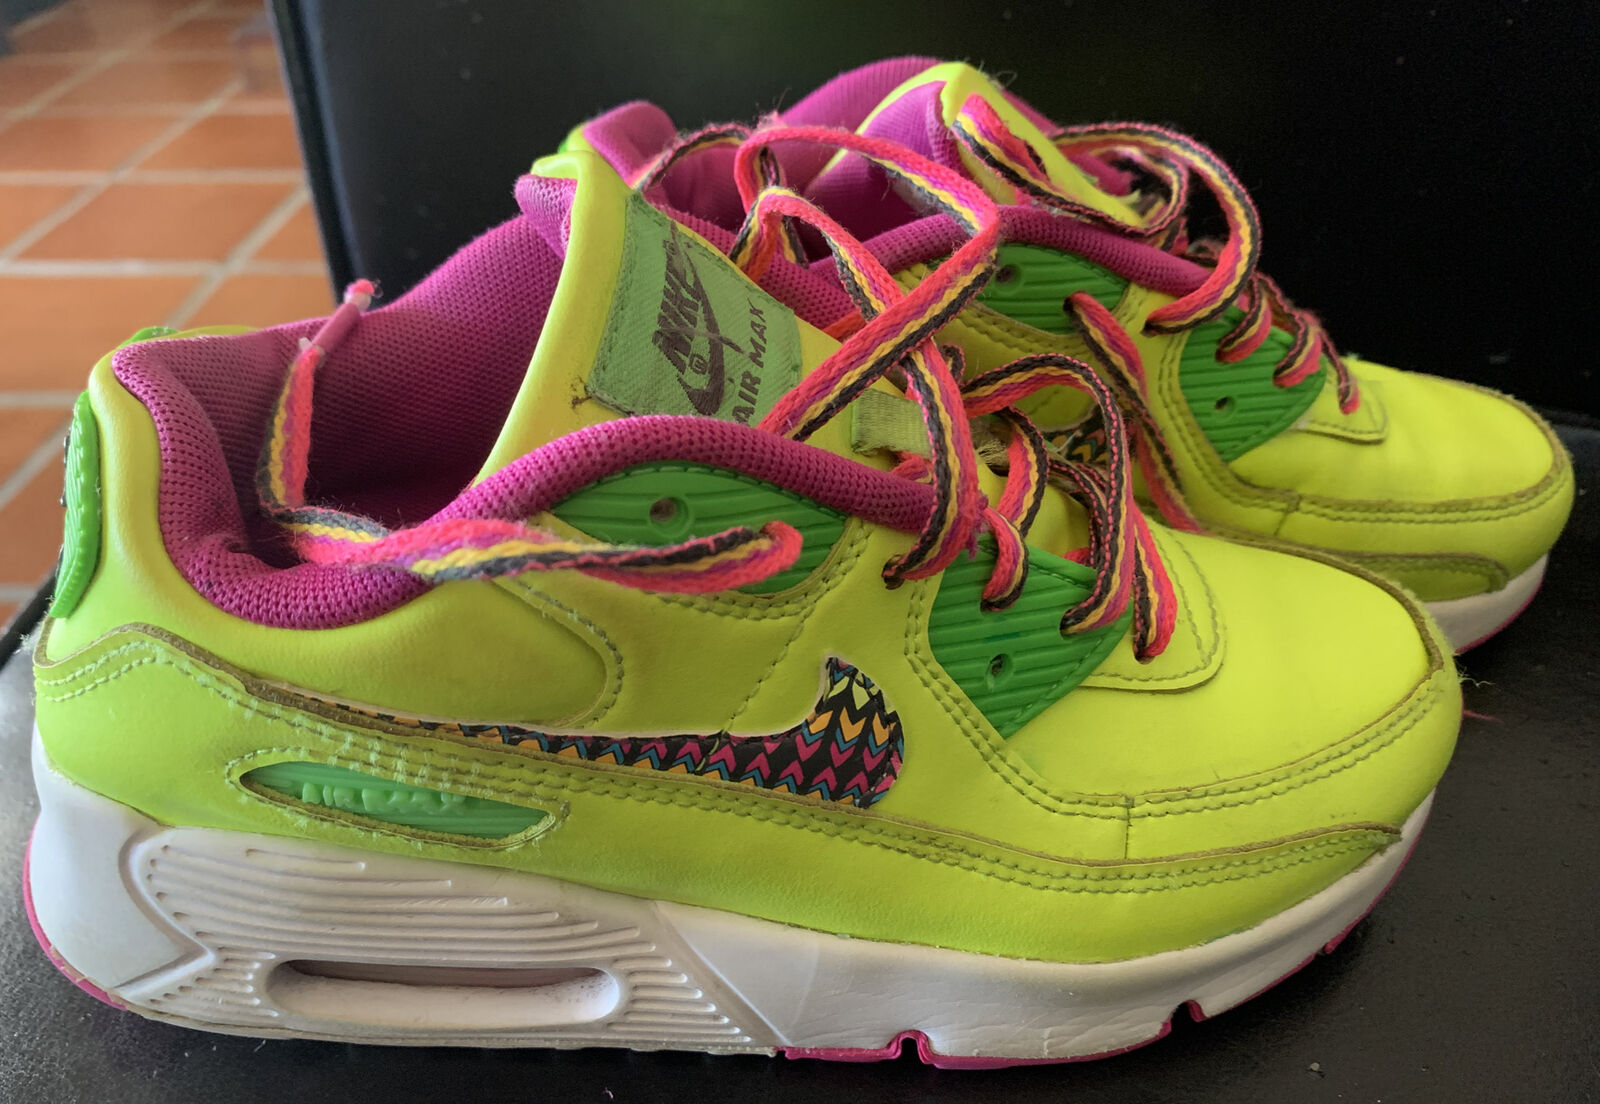 Nike Air Max Neon Green Pink Pink Girls Youth Size 2y Unique Sneakers Shoes